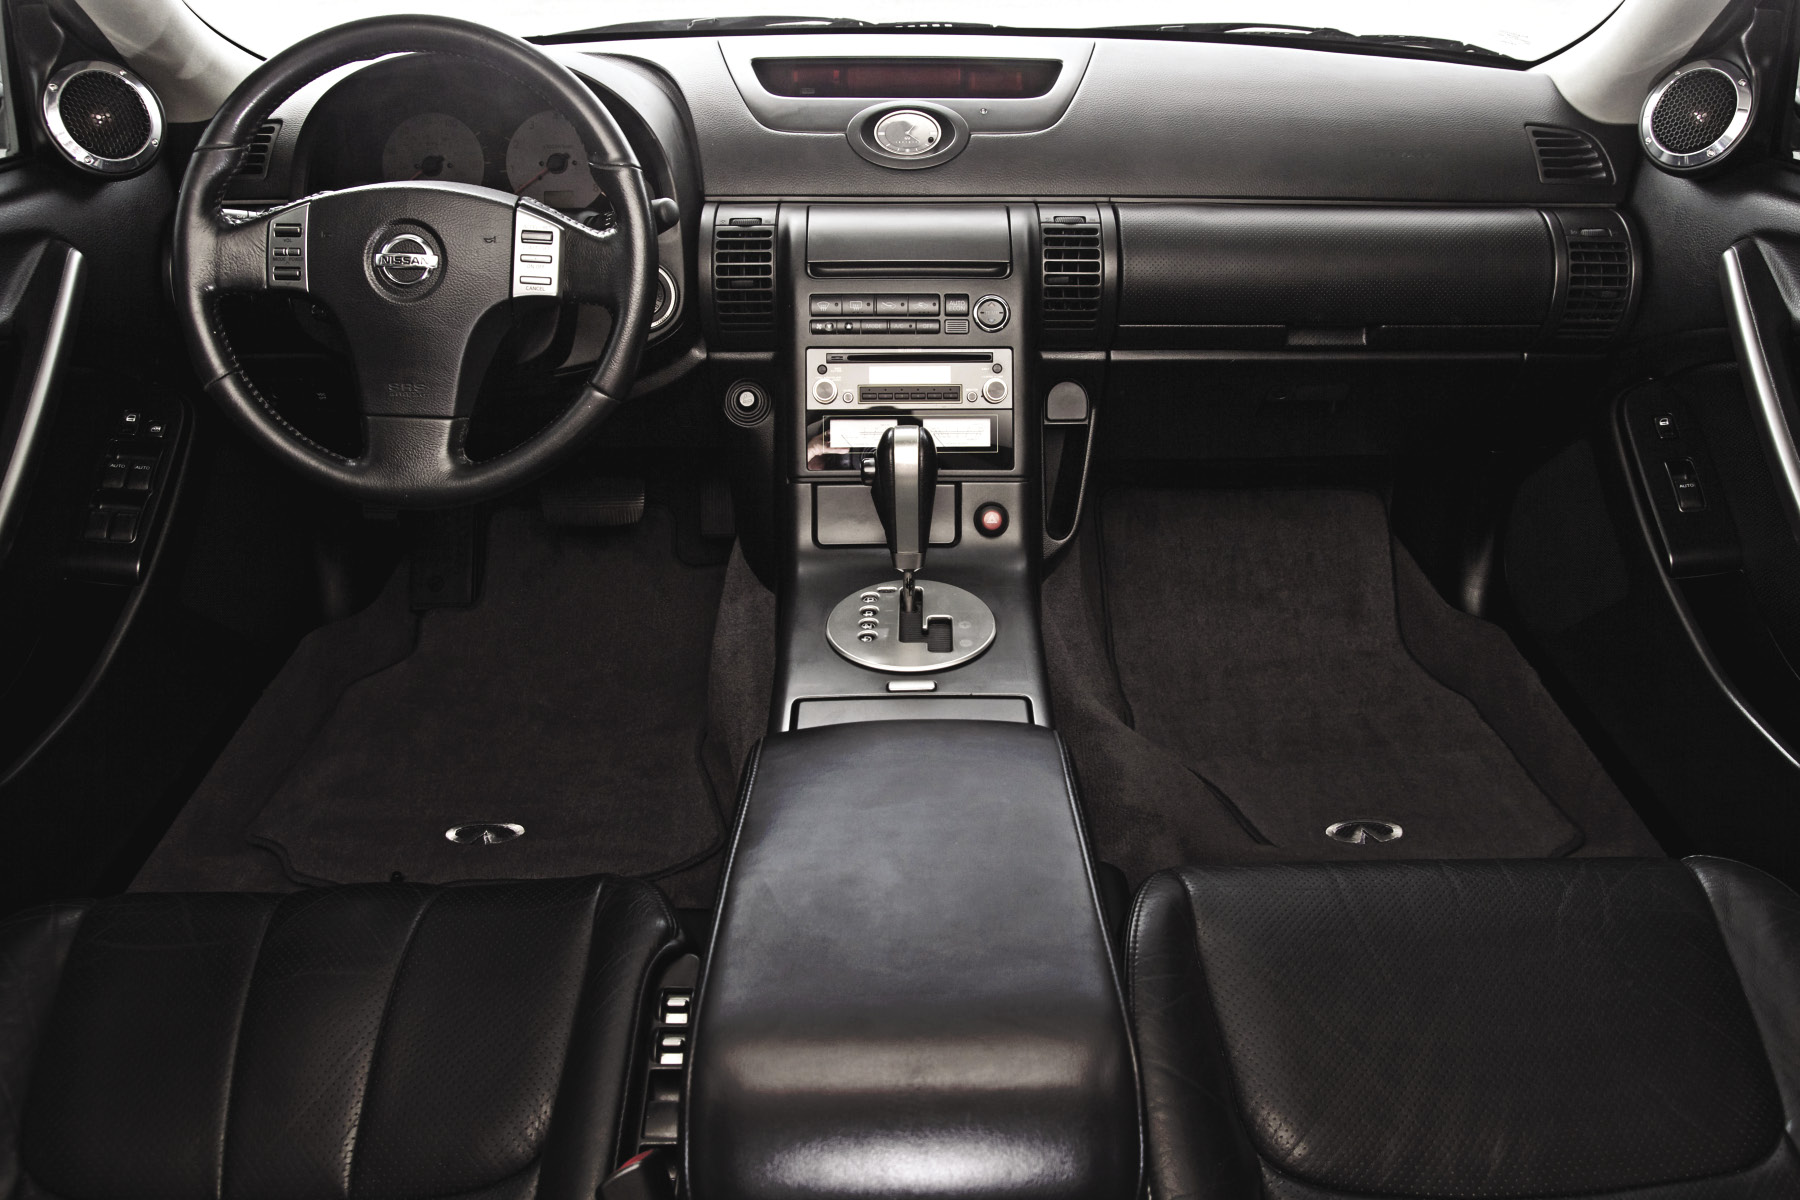 The Doctor Is In: 2003 Infiniti G35